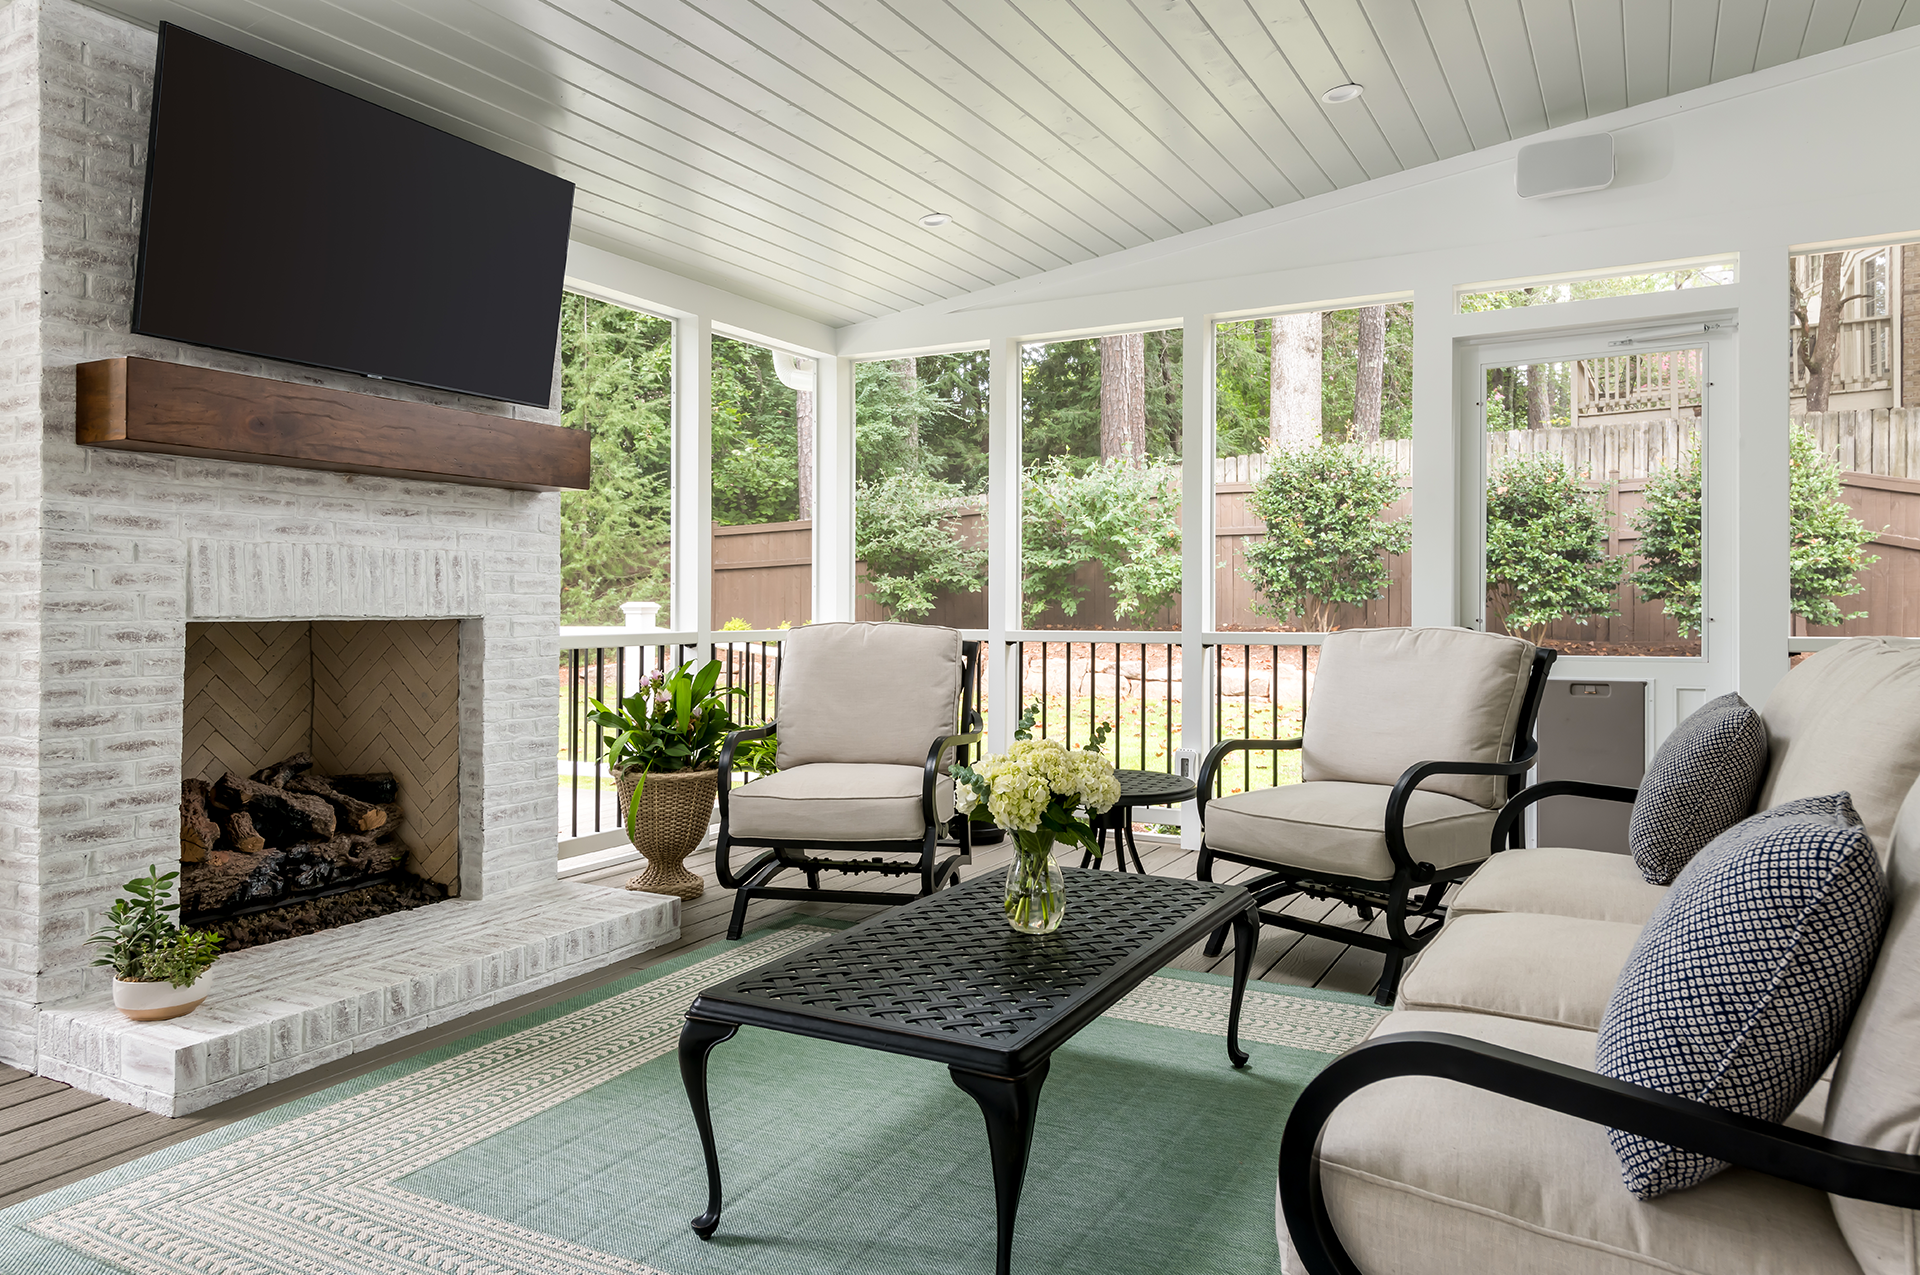 A newly remodeled screened porch with TV and seating